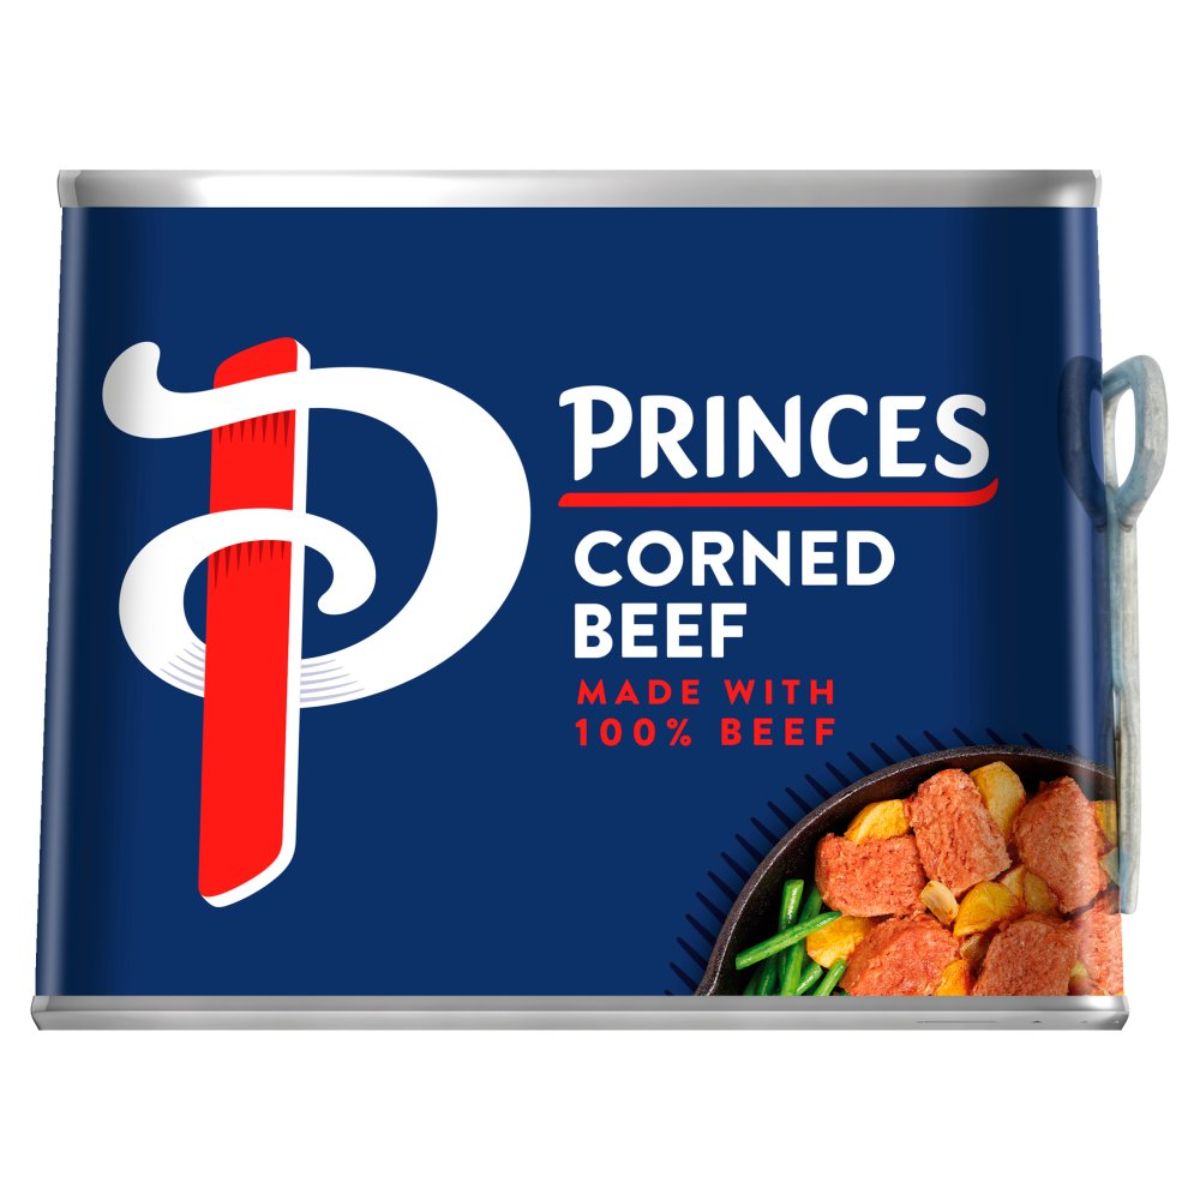 Princes - Corned Beef - 200g in a tin.